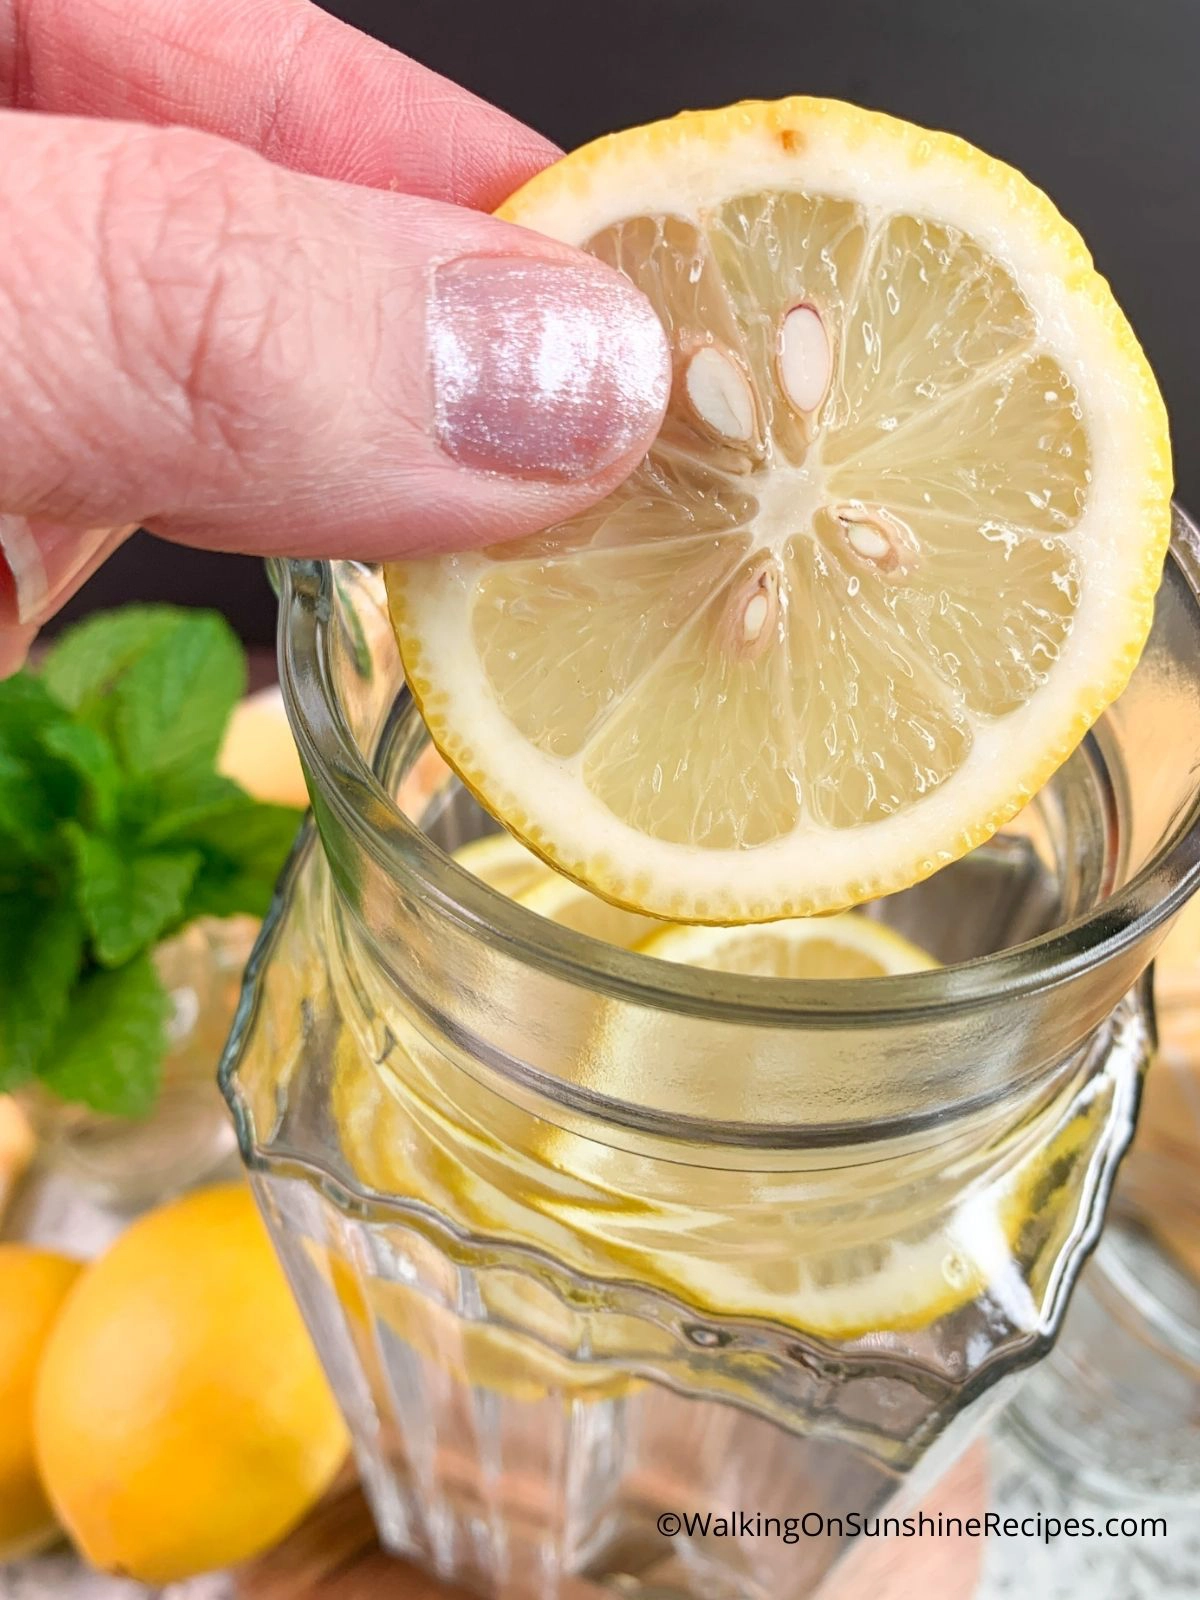 Add lemon slices to pitcher of water.